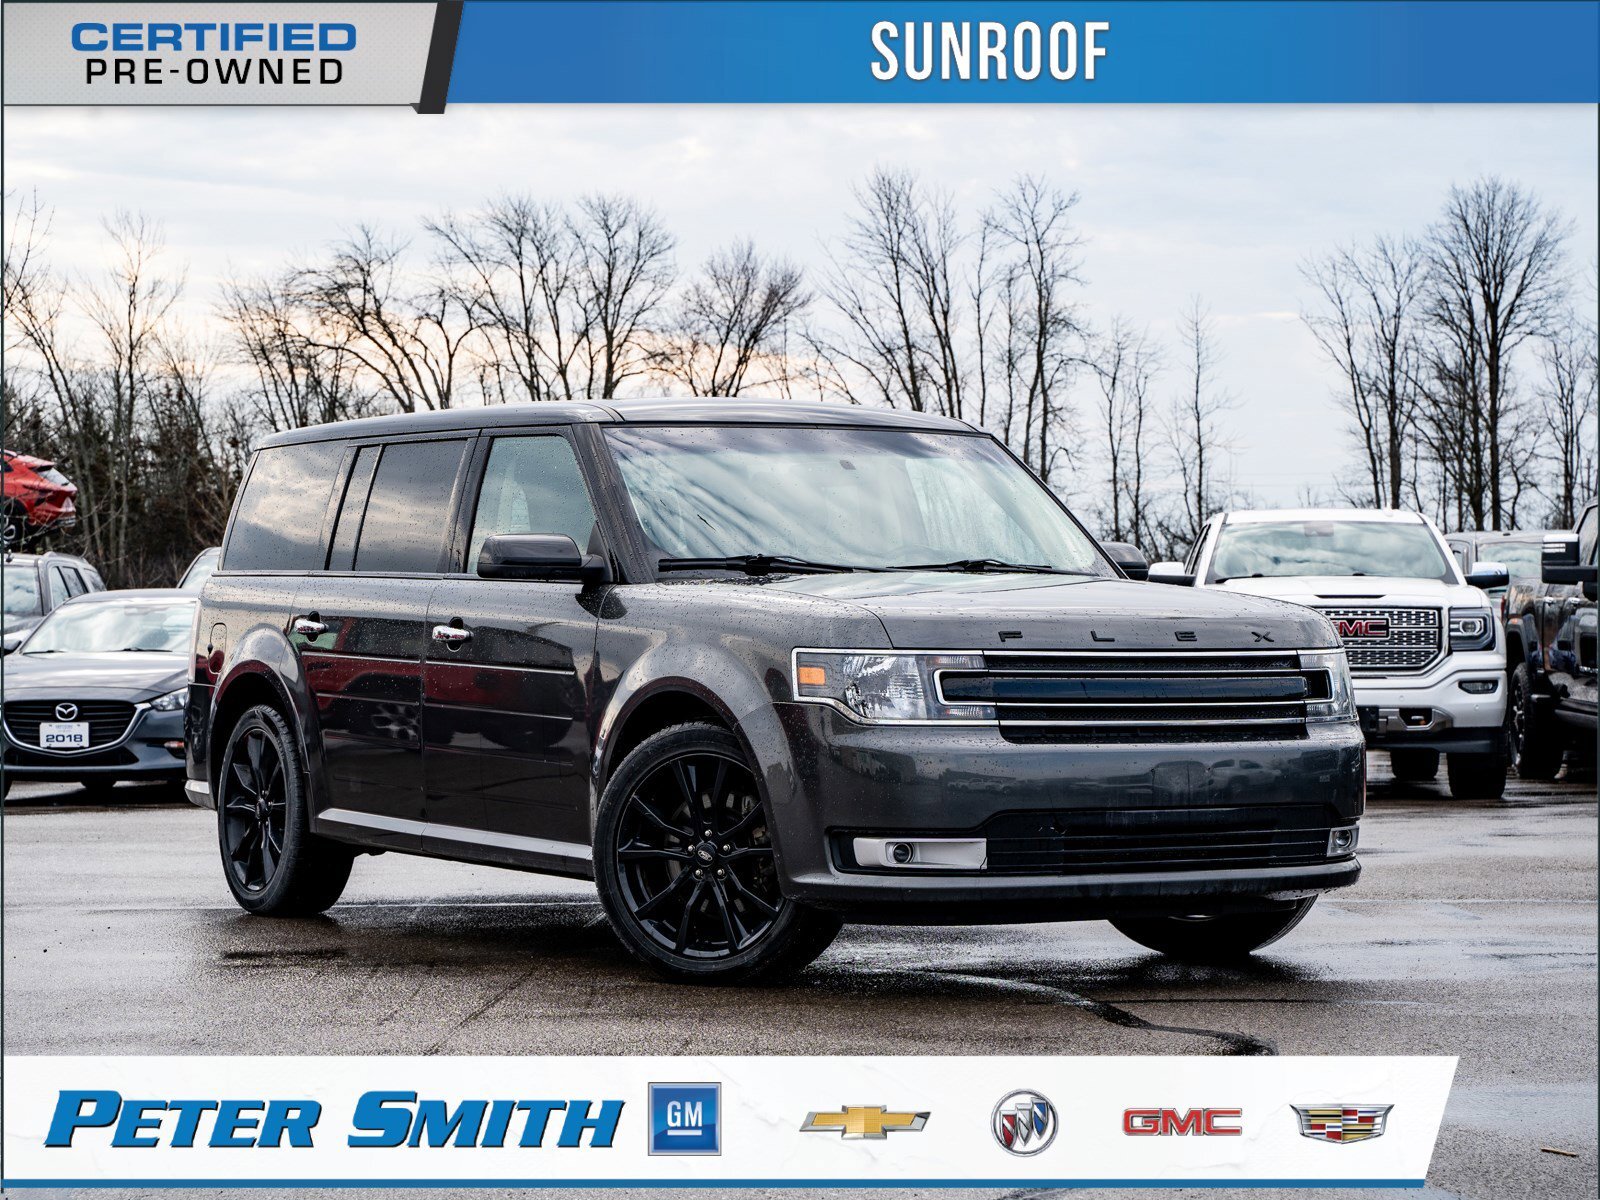 2019 Ford Flex SEL - 3.5L TI-VCT V6 | Sunroof | Heated Front Seat